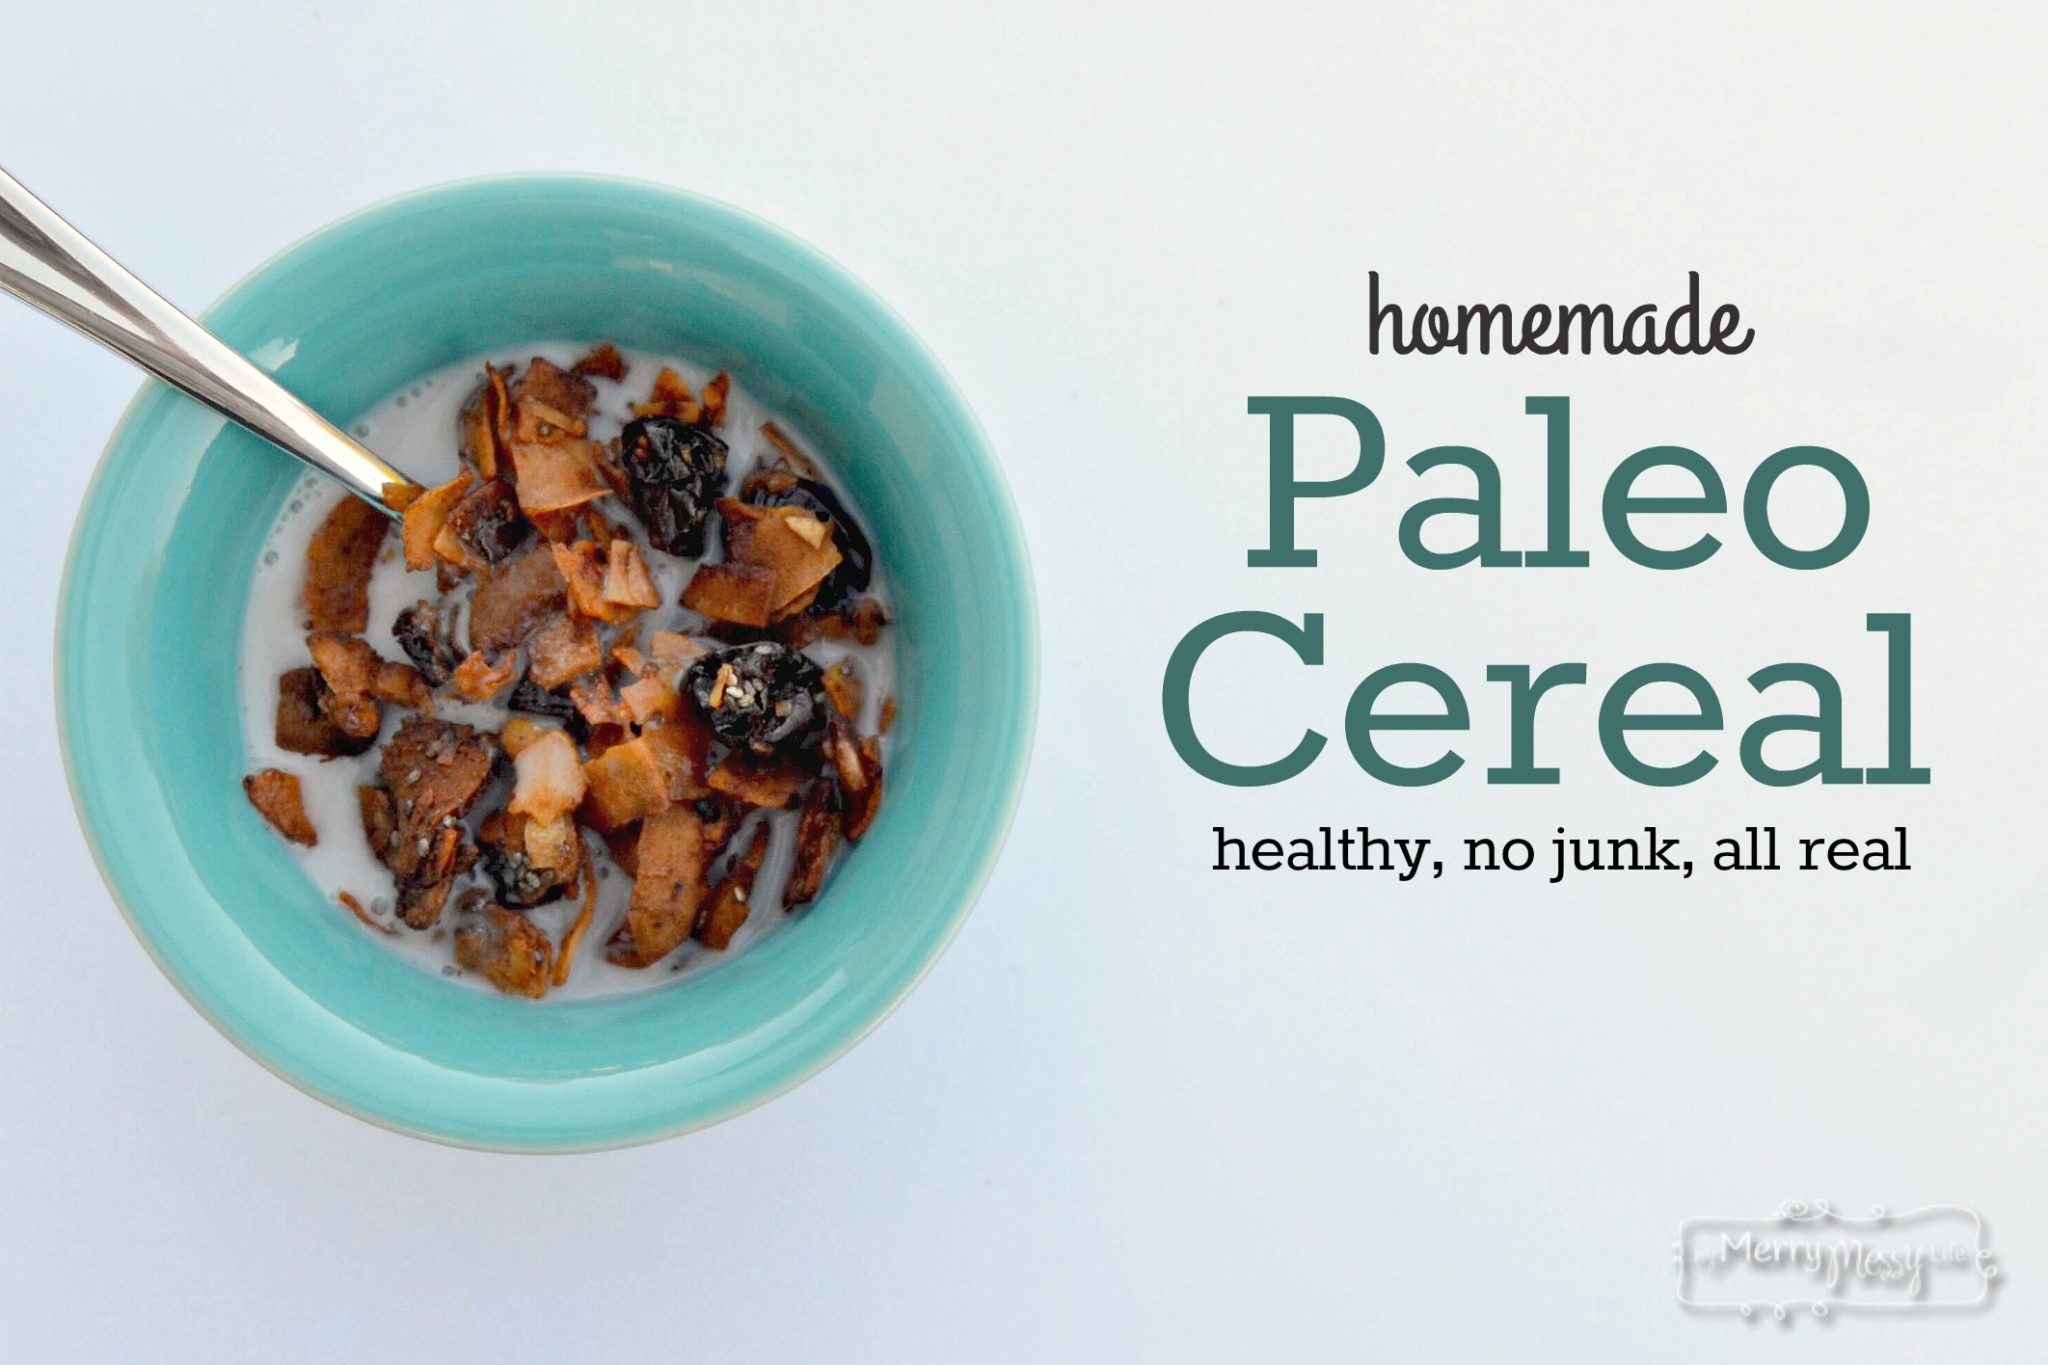 Paleo Cereal Recipe – Loaded with Nutrition